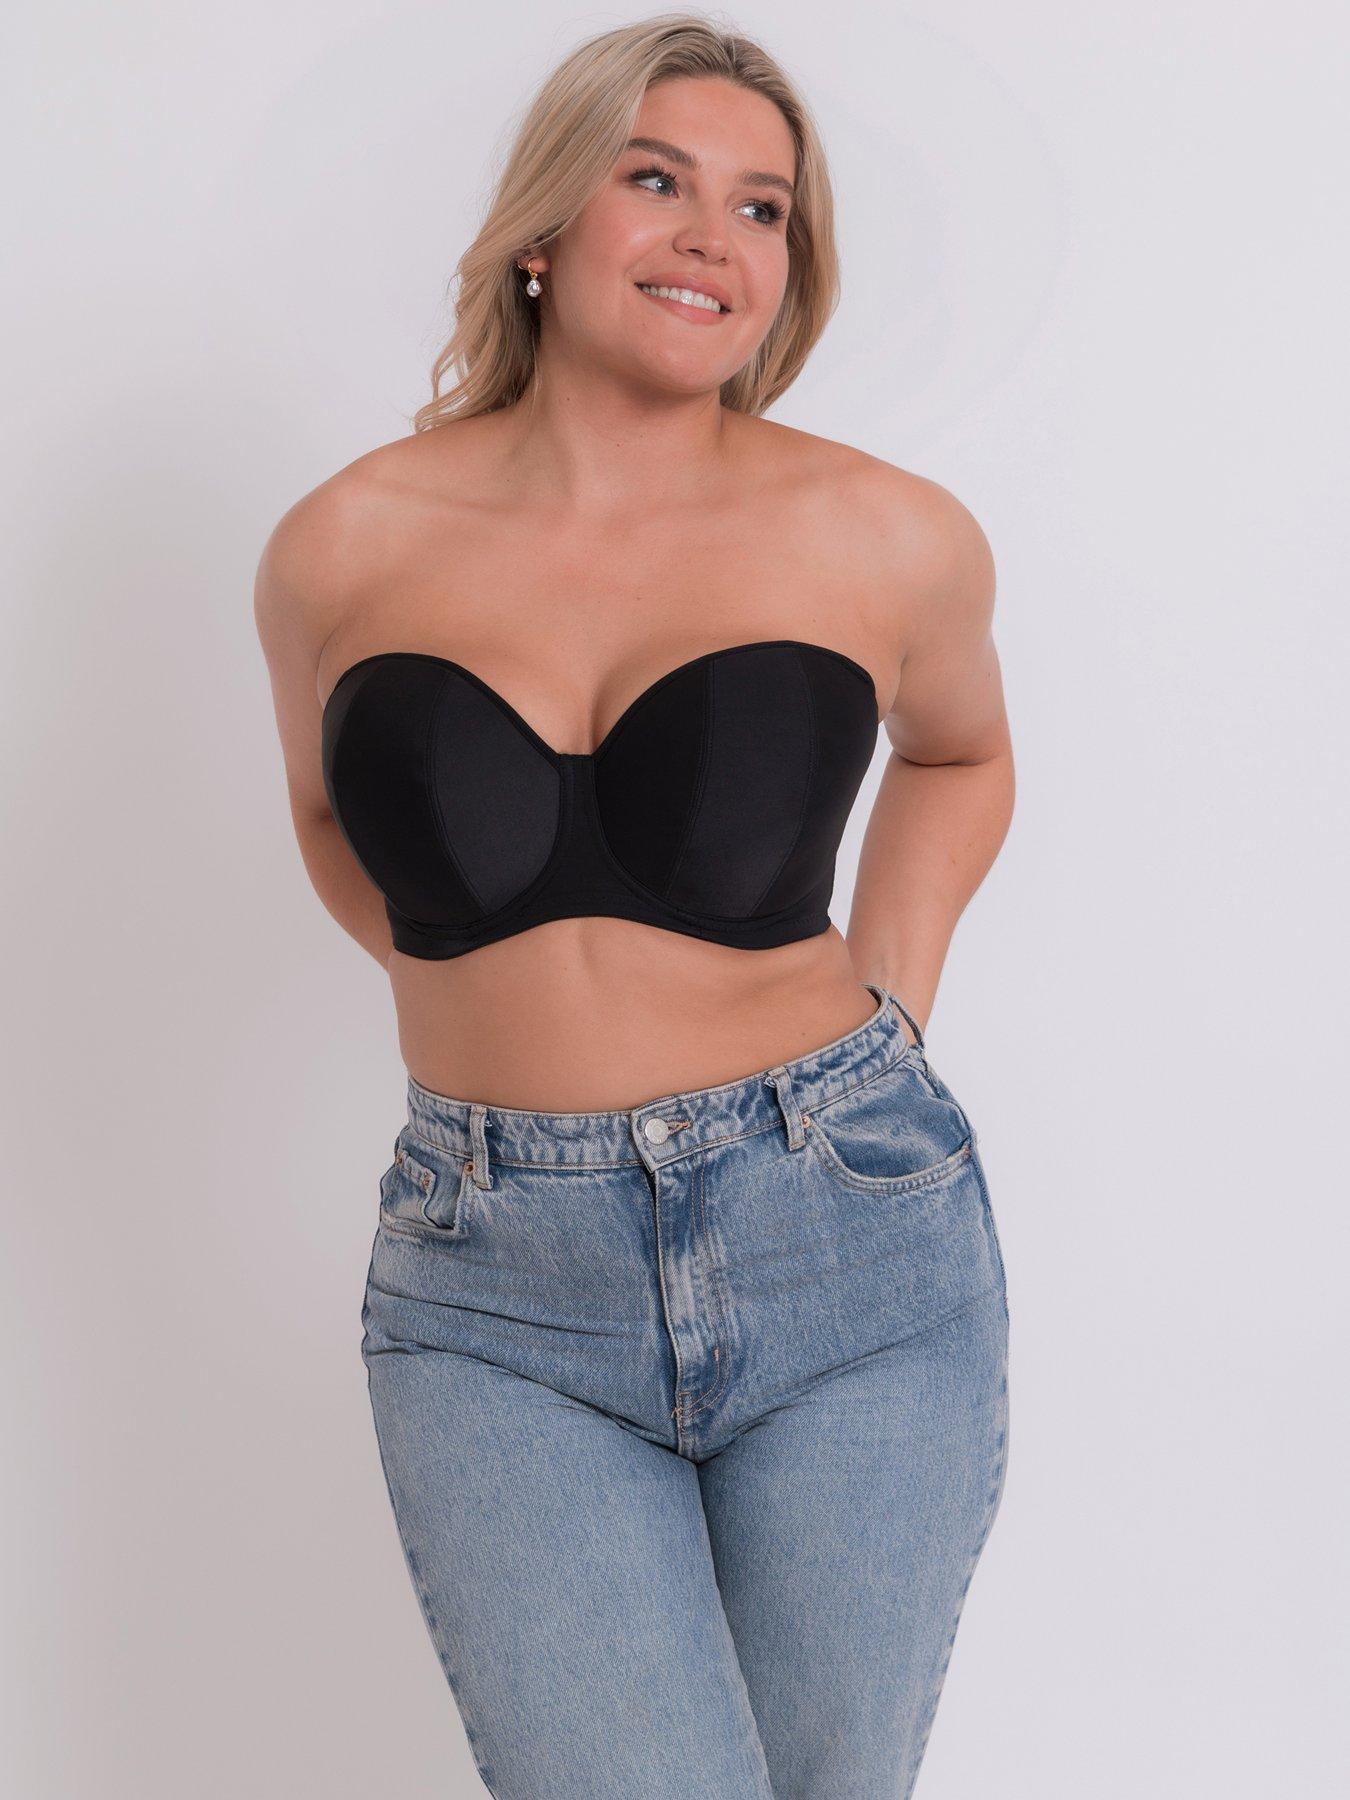 Curvy Kate Smoothie Strapless Bra in Black - Busted Bra Shop